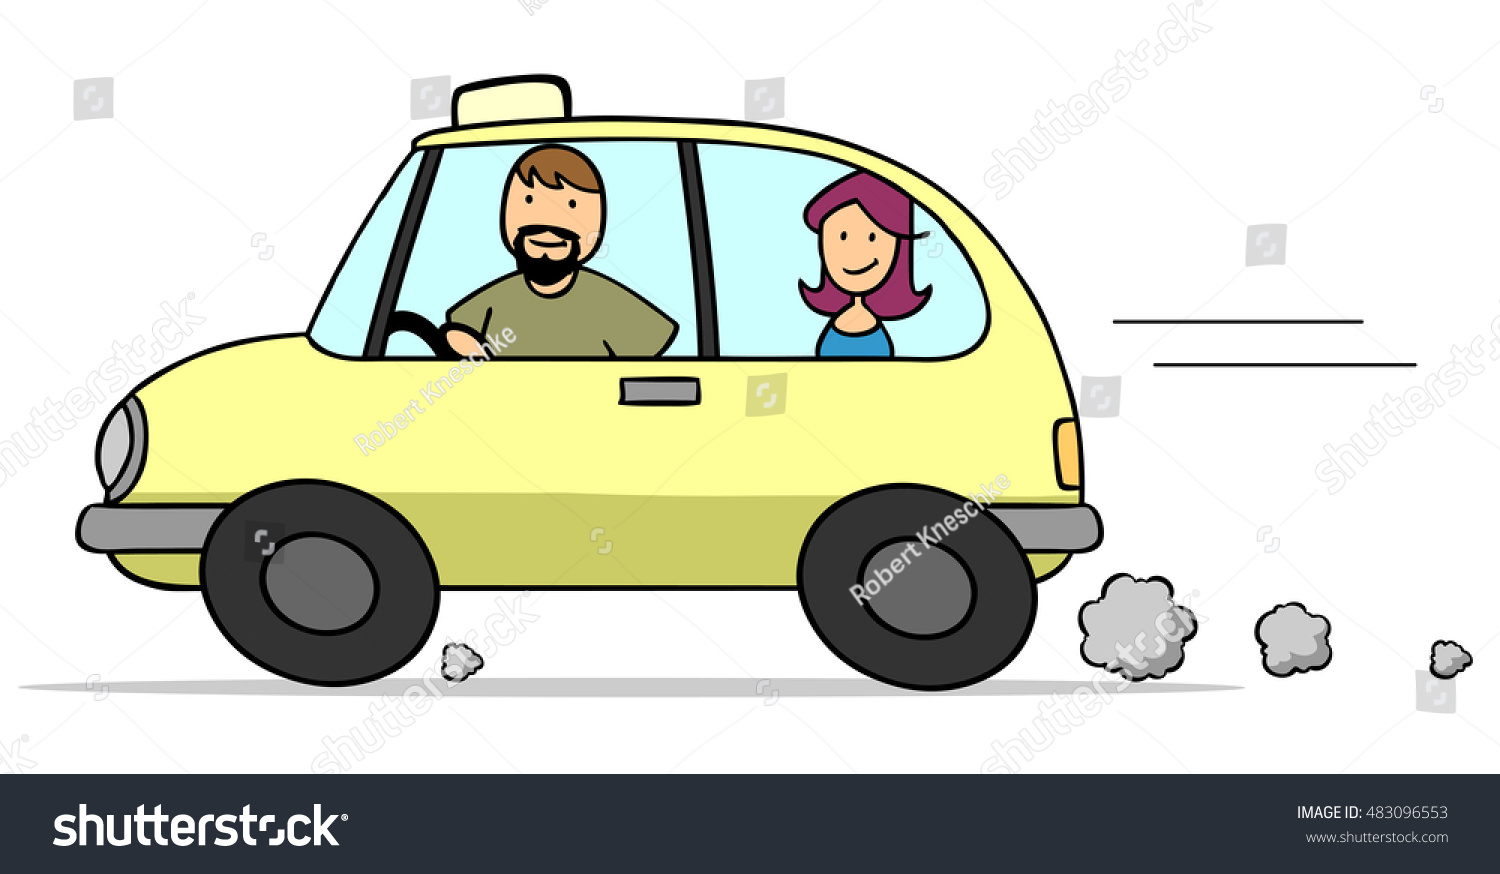 Cartoon Man As Taxi Driver In Cab With Female Passenger Stock Photo